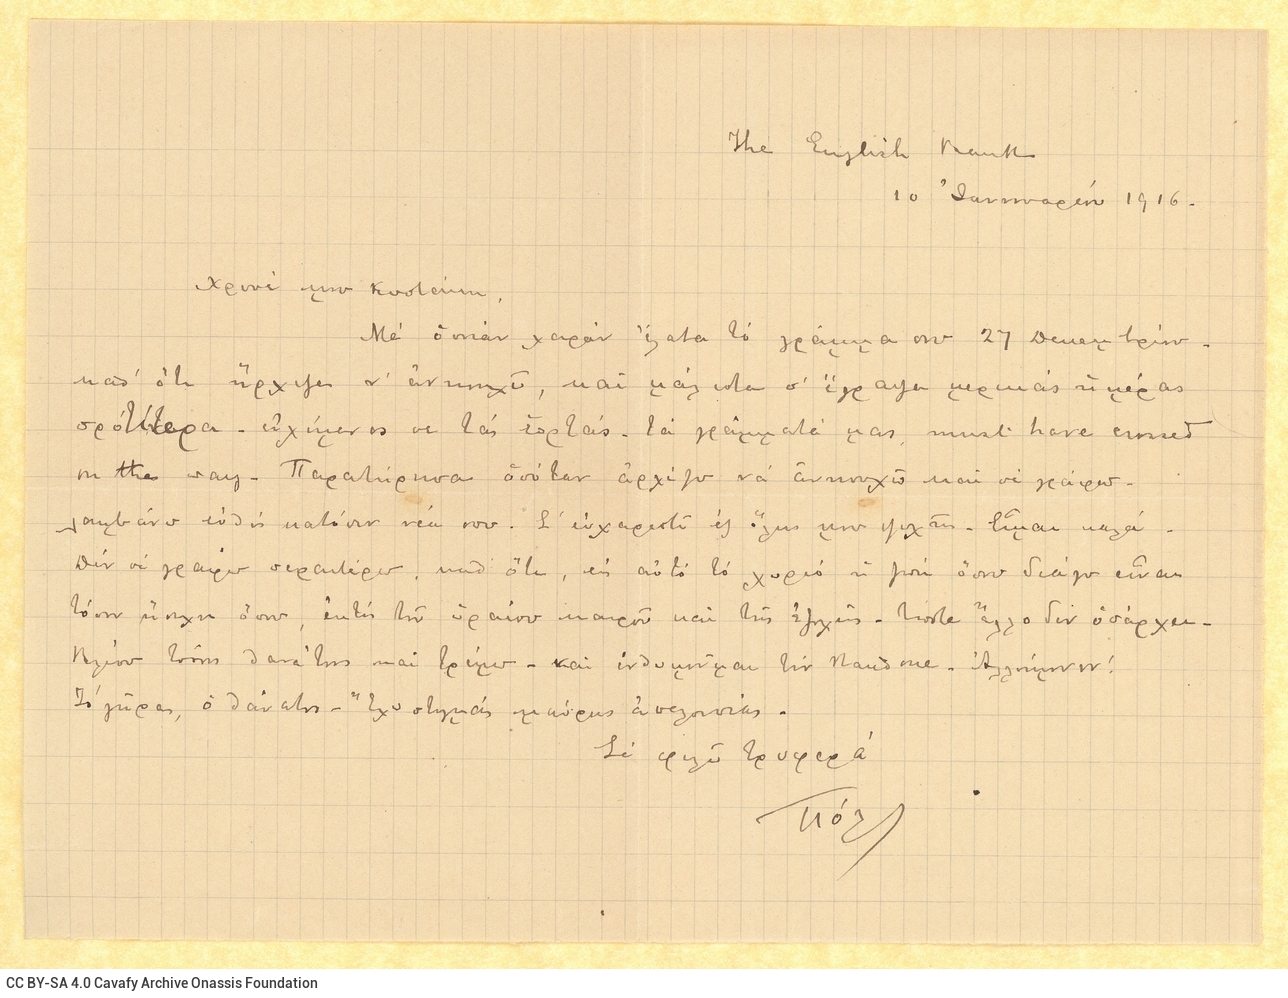 Handwritten letter by Paul Cavafy to C. P. Cavafy from France. It is a reply to a letter by C. P. Cavafy, dated 27 December. 